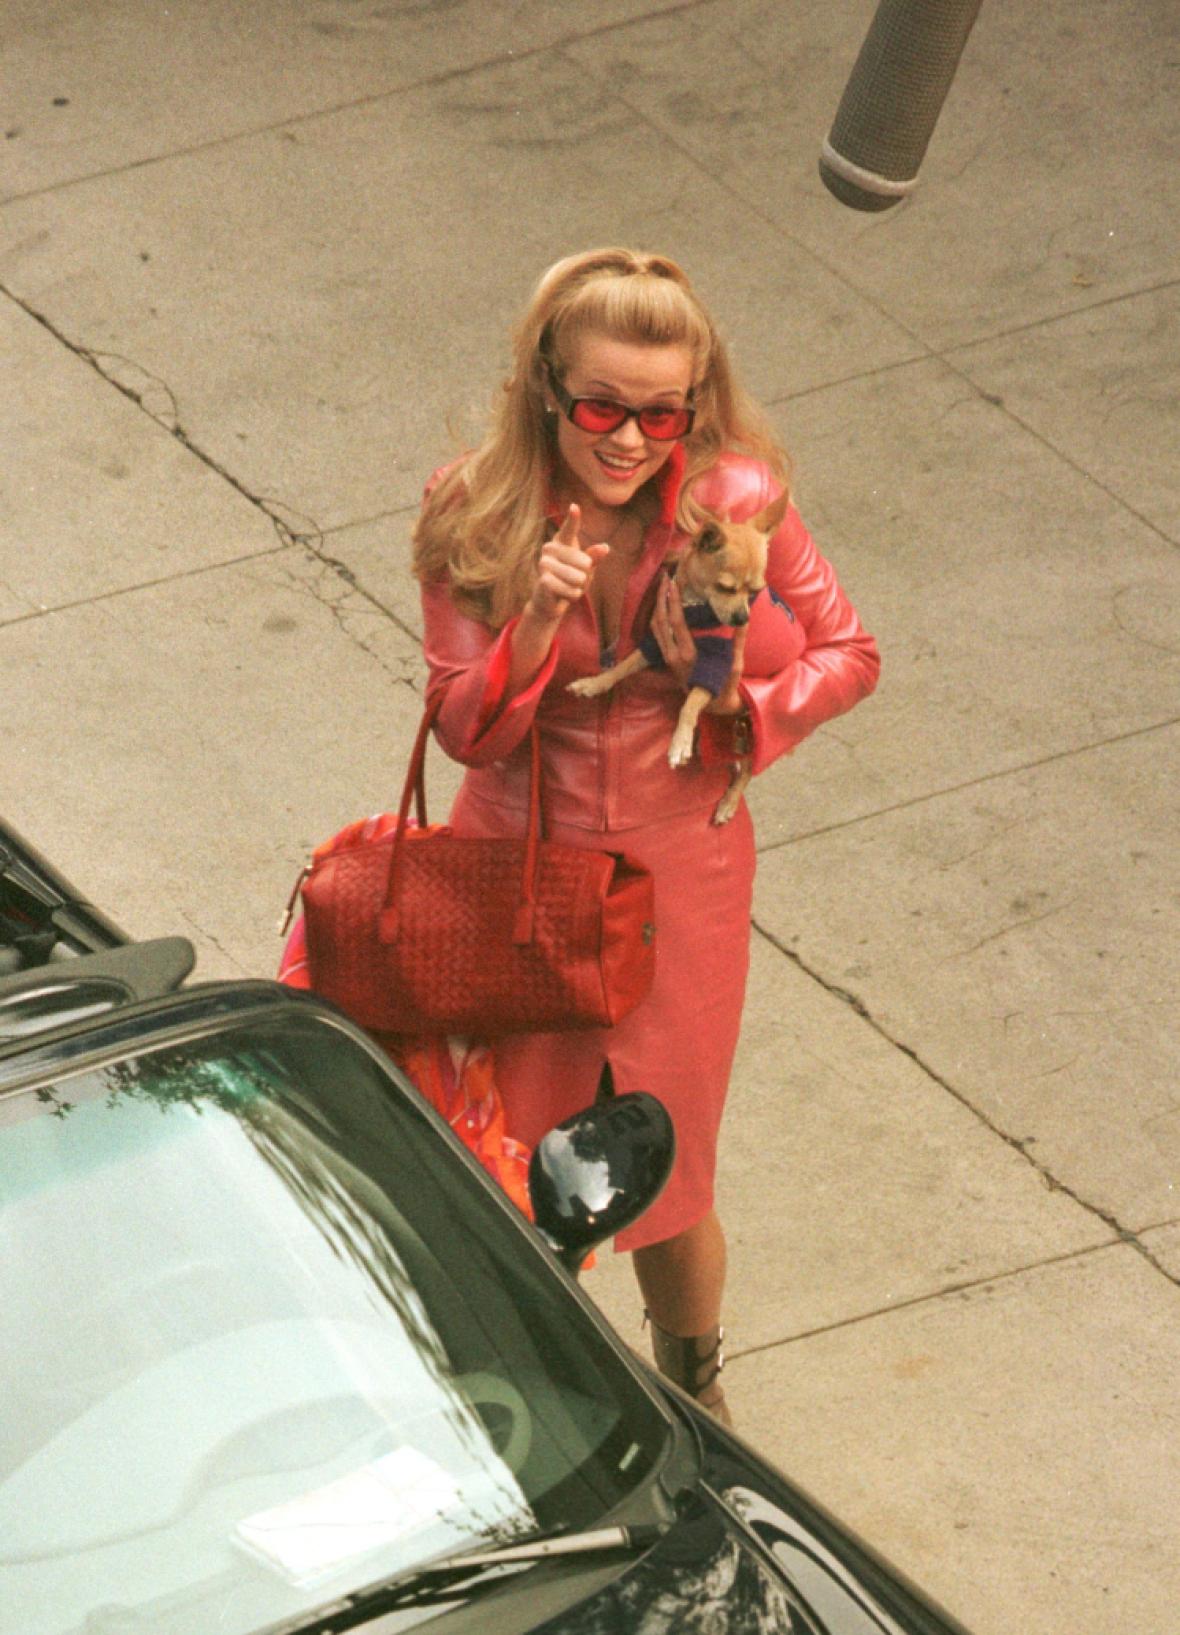 Legally Blonde 3 Reese Witherspoon Is Officially Returning As Elle Woods